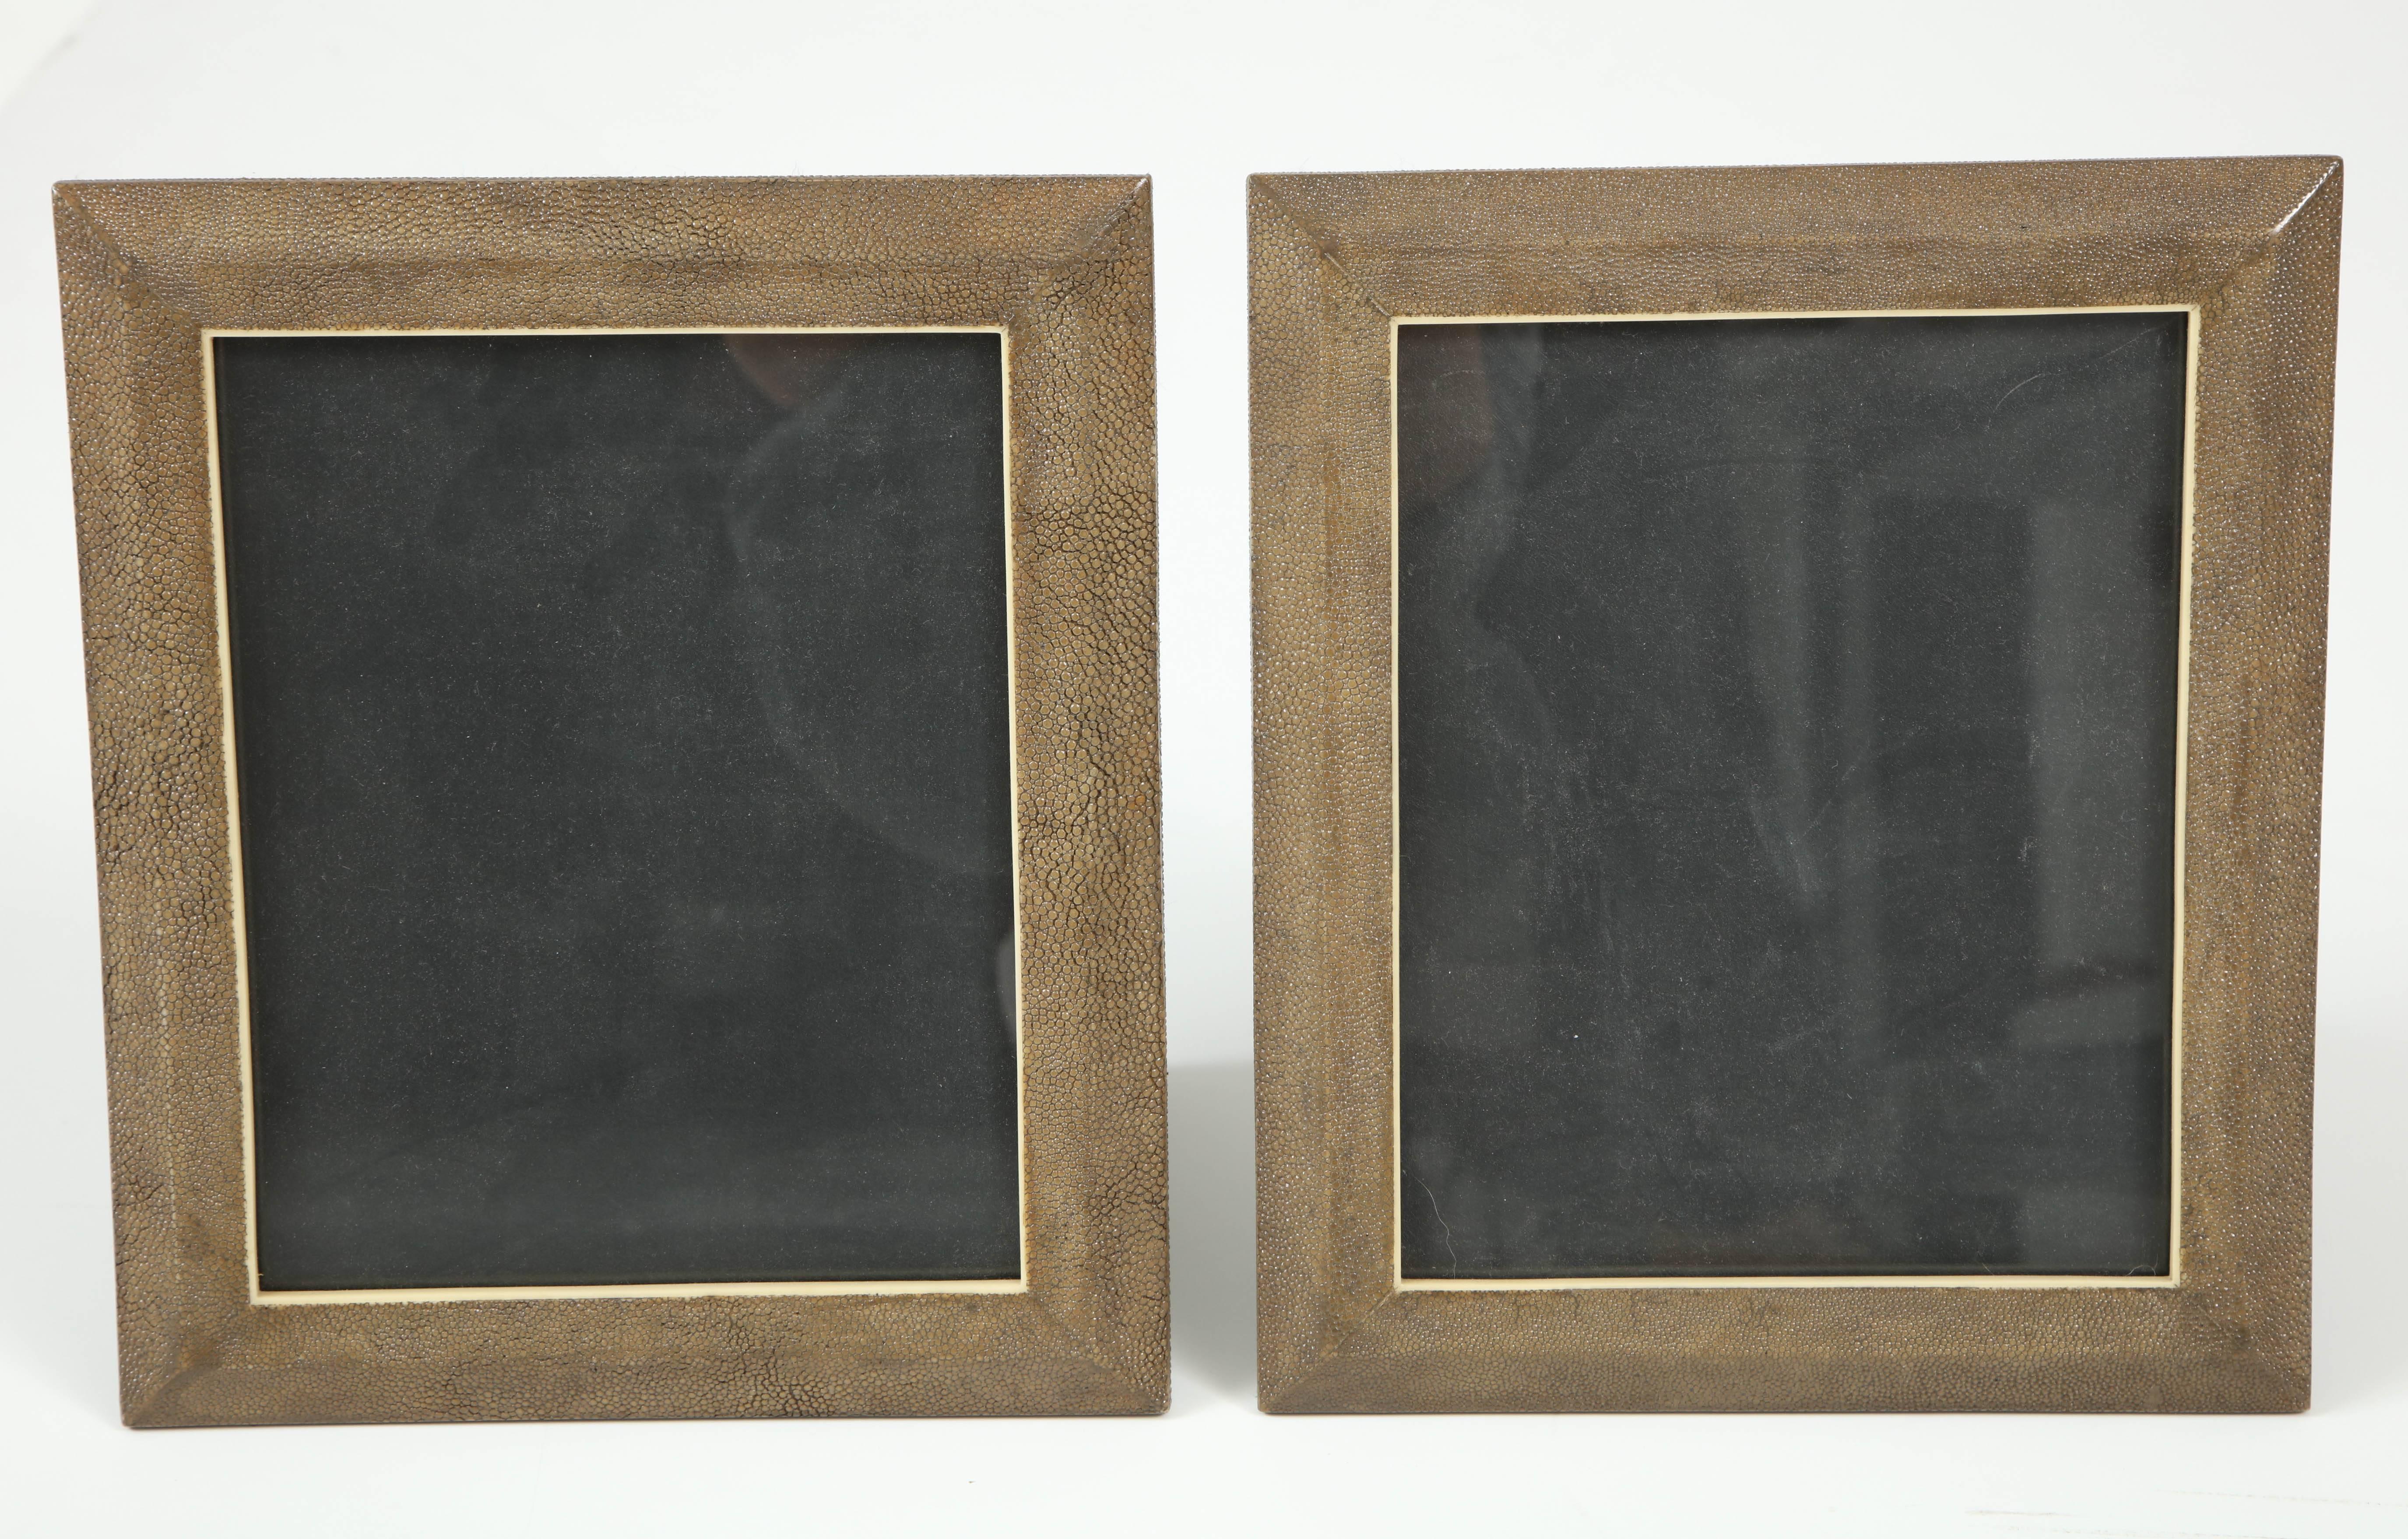 Decorative shagreen picture frame. Each frame is 12.5 x 10.5. Made in France.